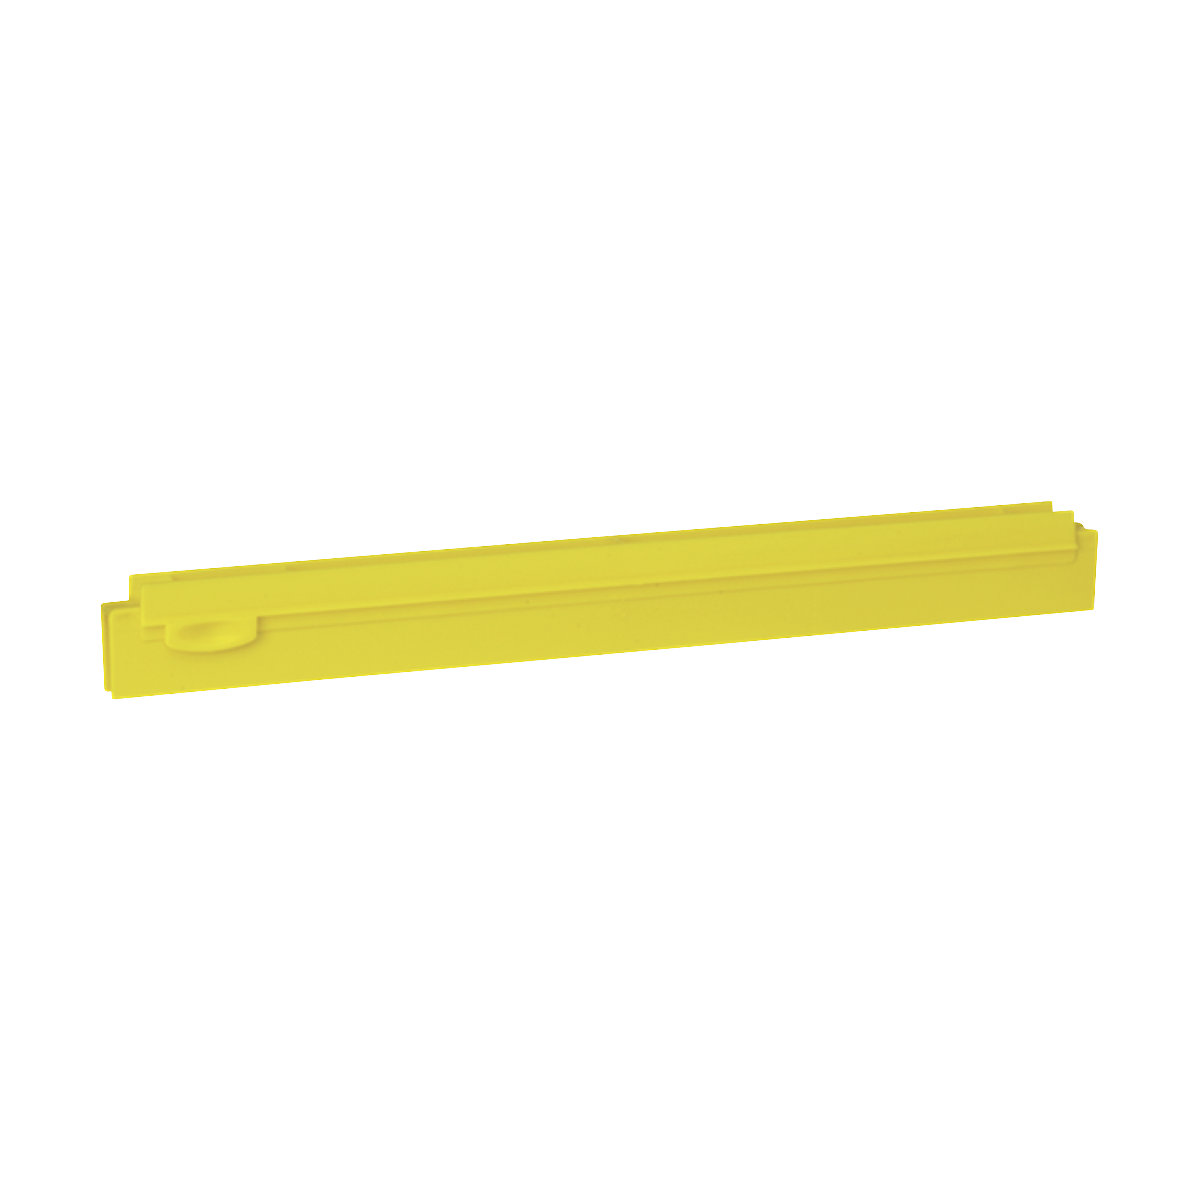 Replacement cartridge, hygienic – Vikan, length 400 mm, pack of 10, yellow-1